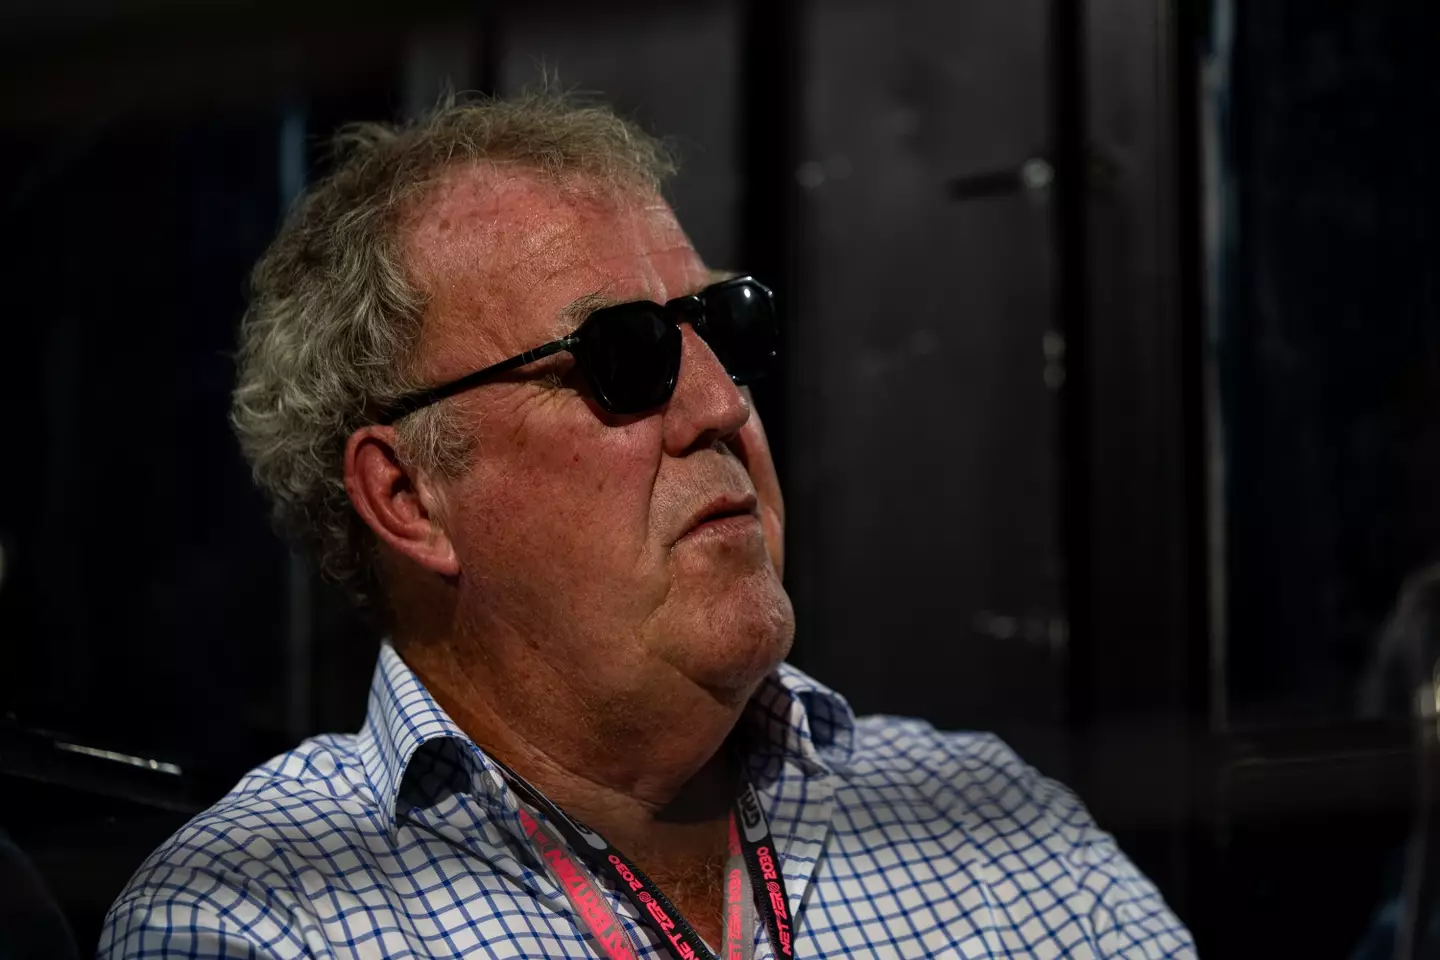 Jeremy Clarkson said he'd been watching Planet Earth III 'but unlike most people, I hate it'.